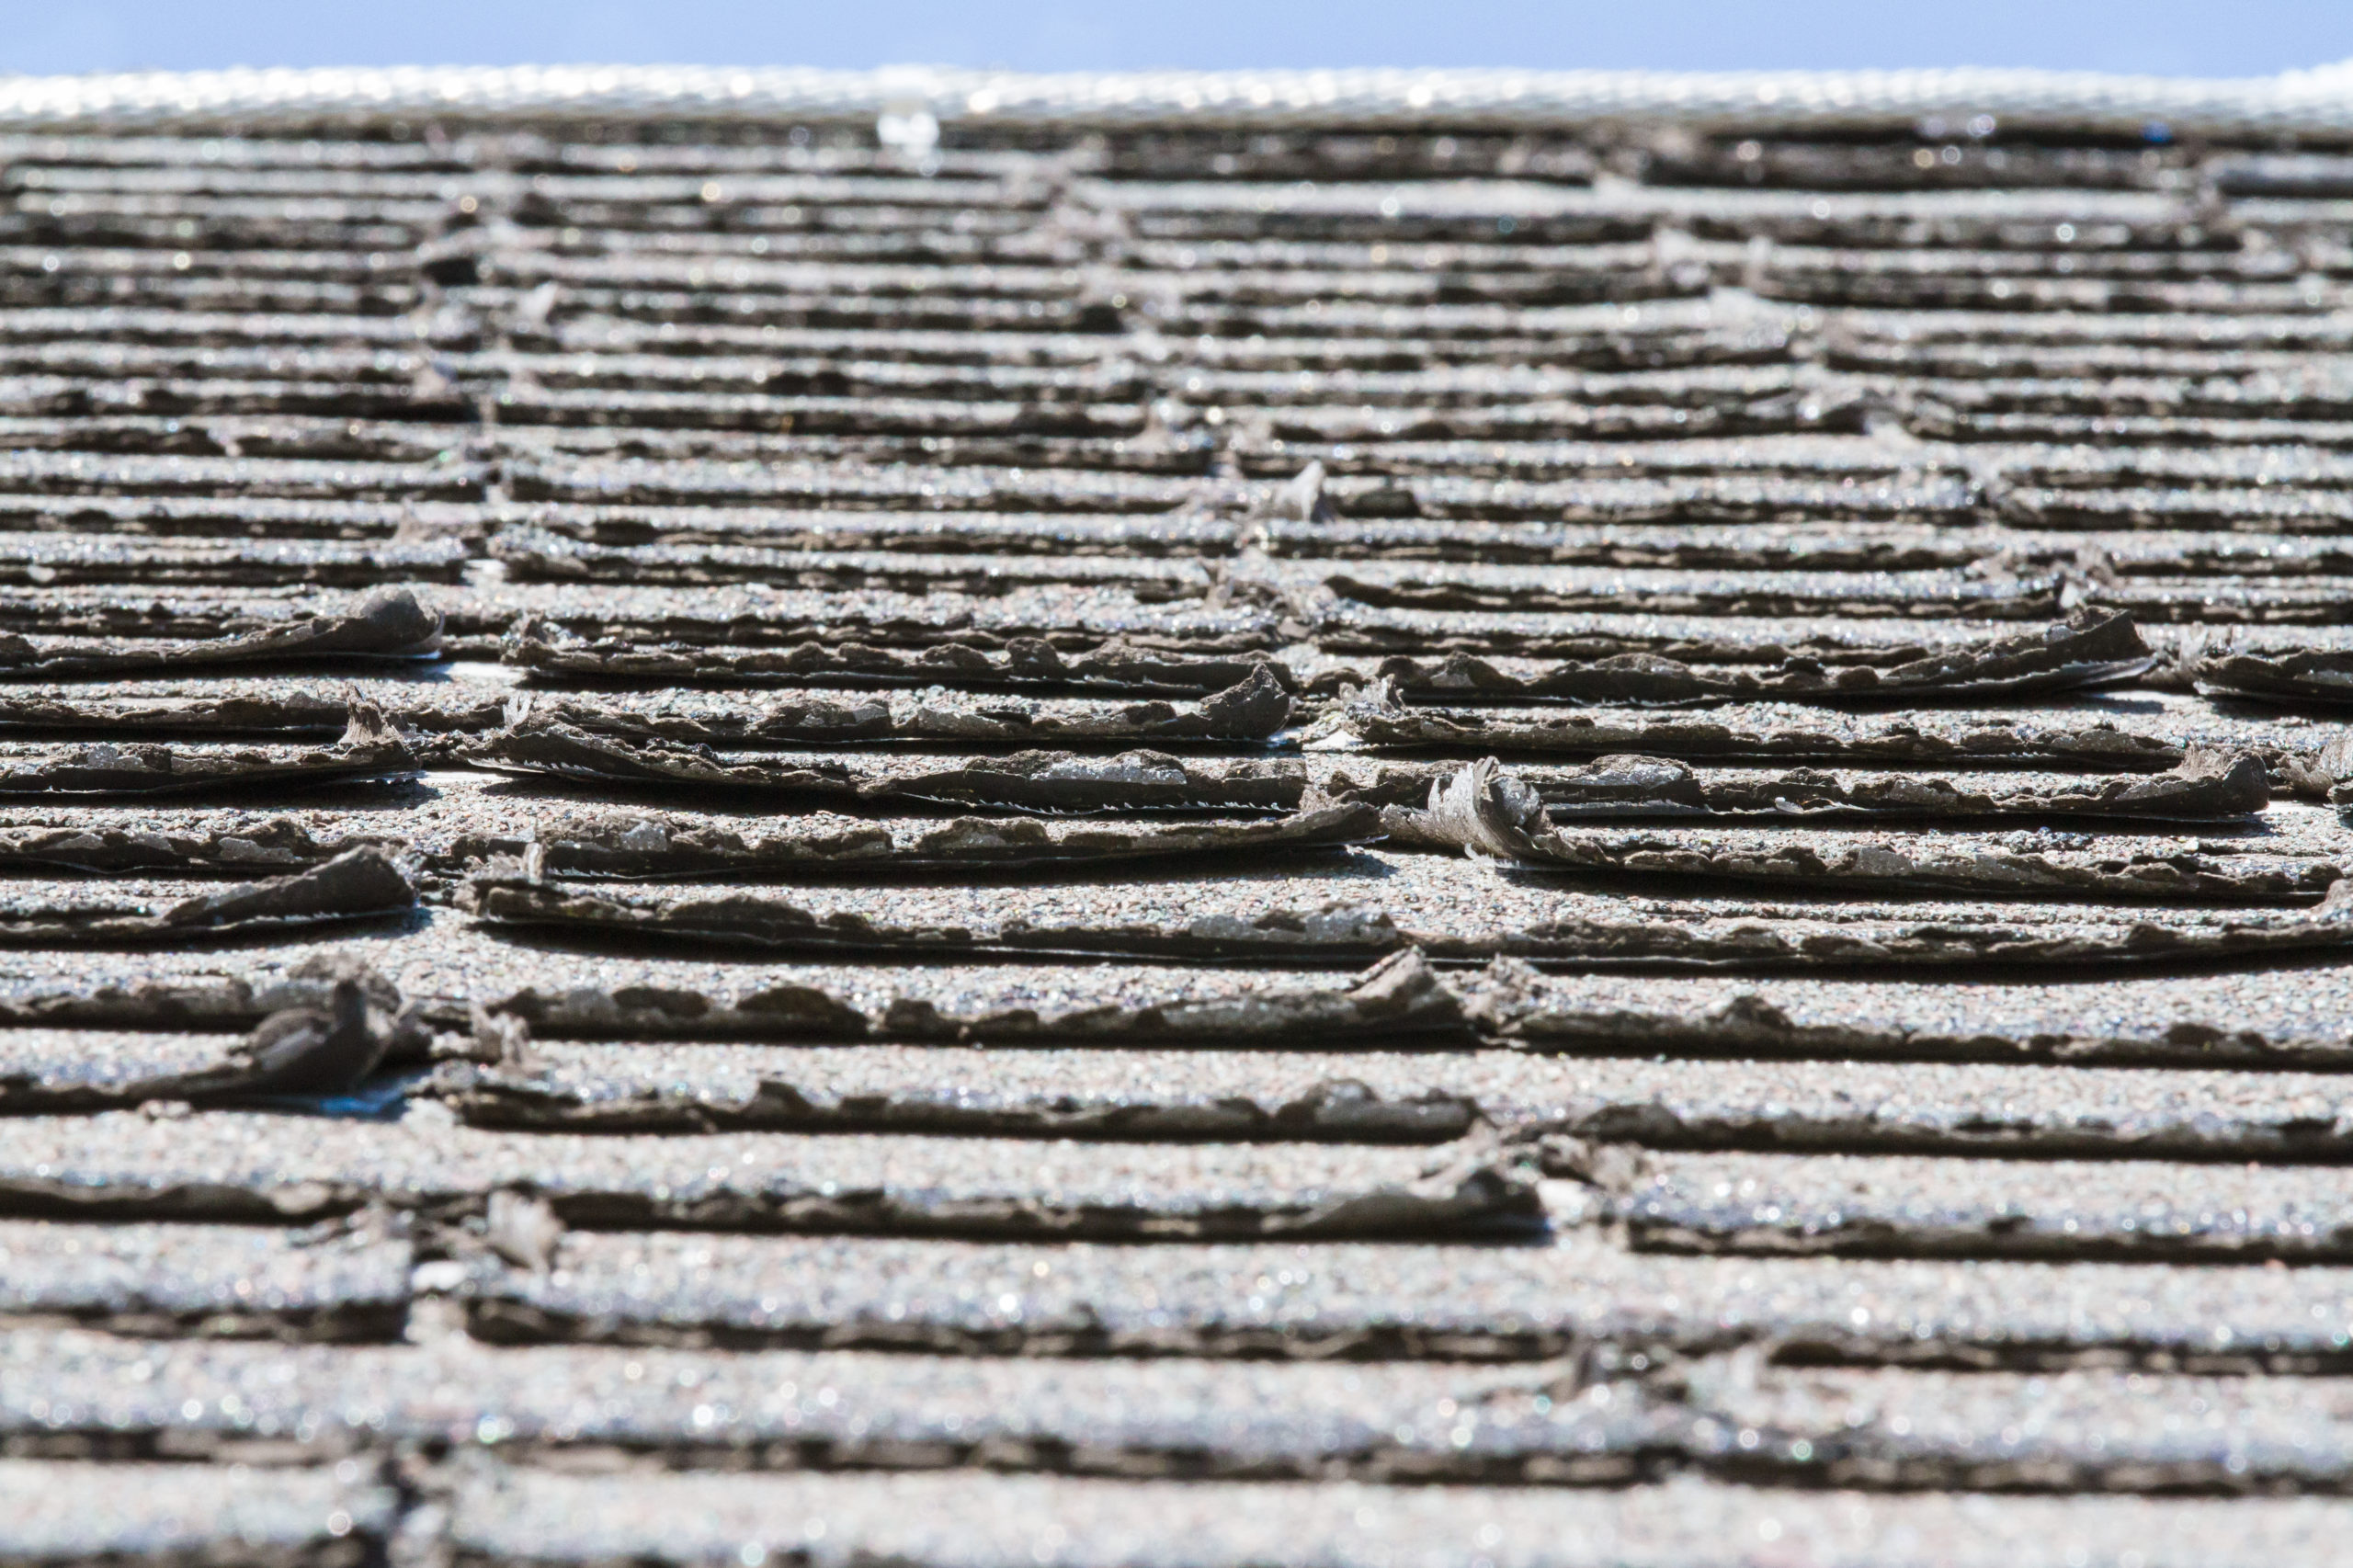 An image of buckling, curling asphalt shingles on a roof